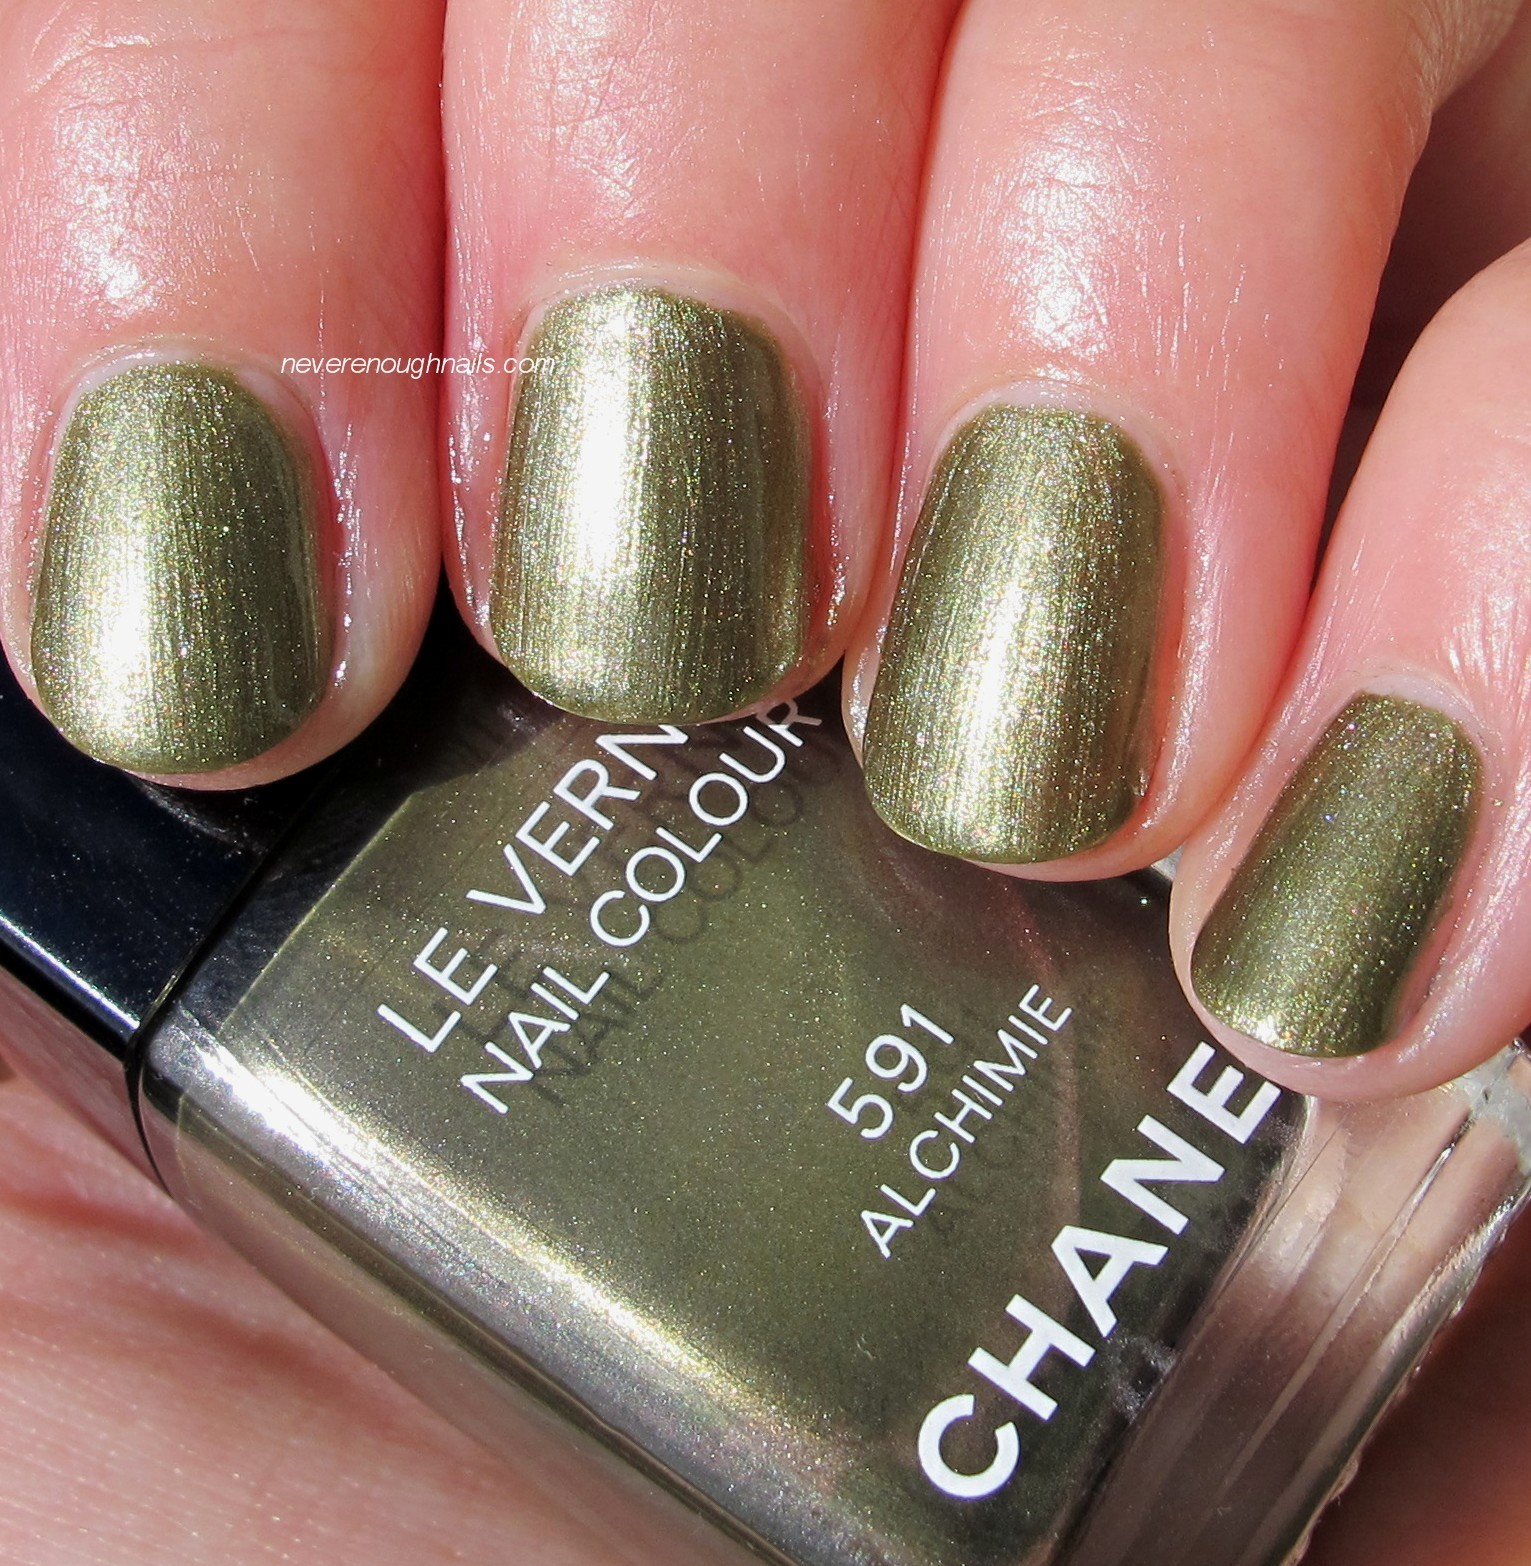 Never Enough Nails: Chanel Alchimie